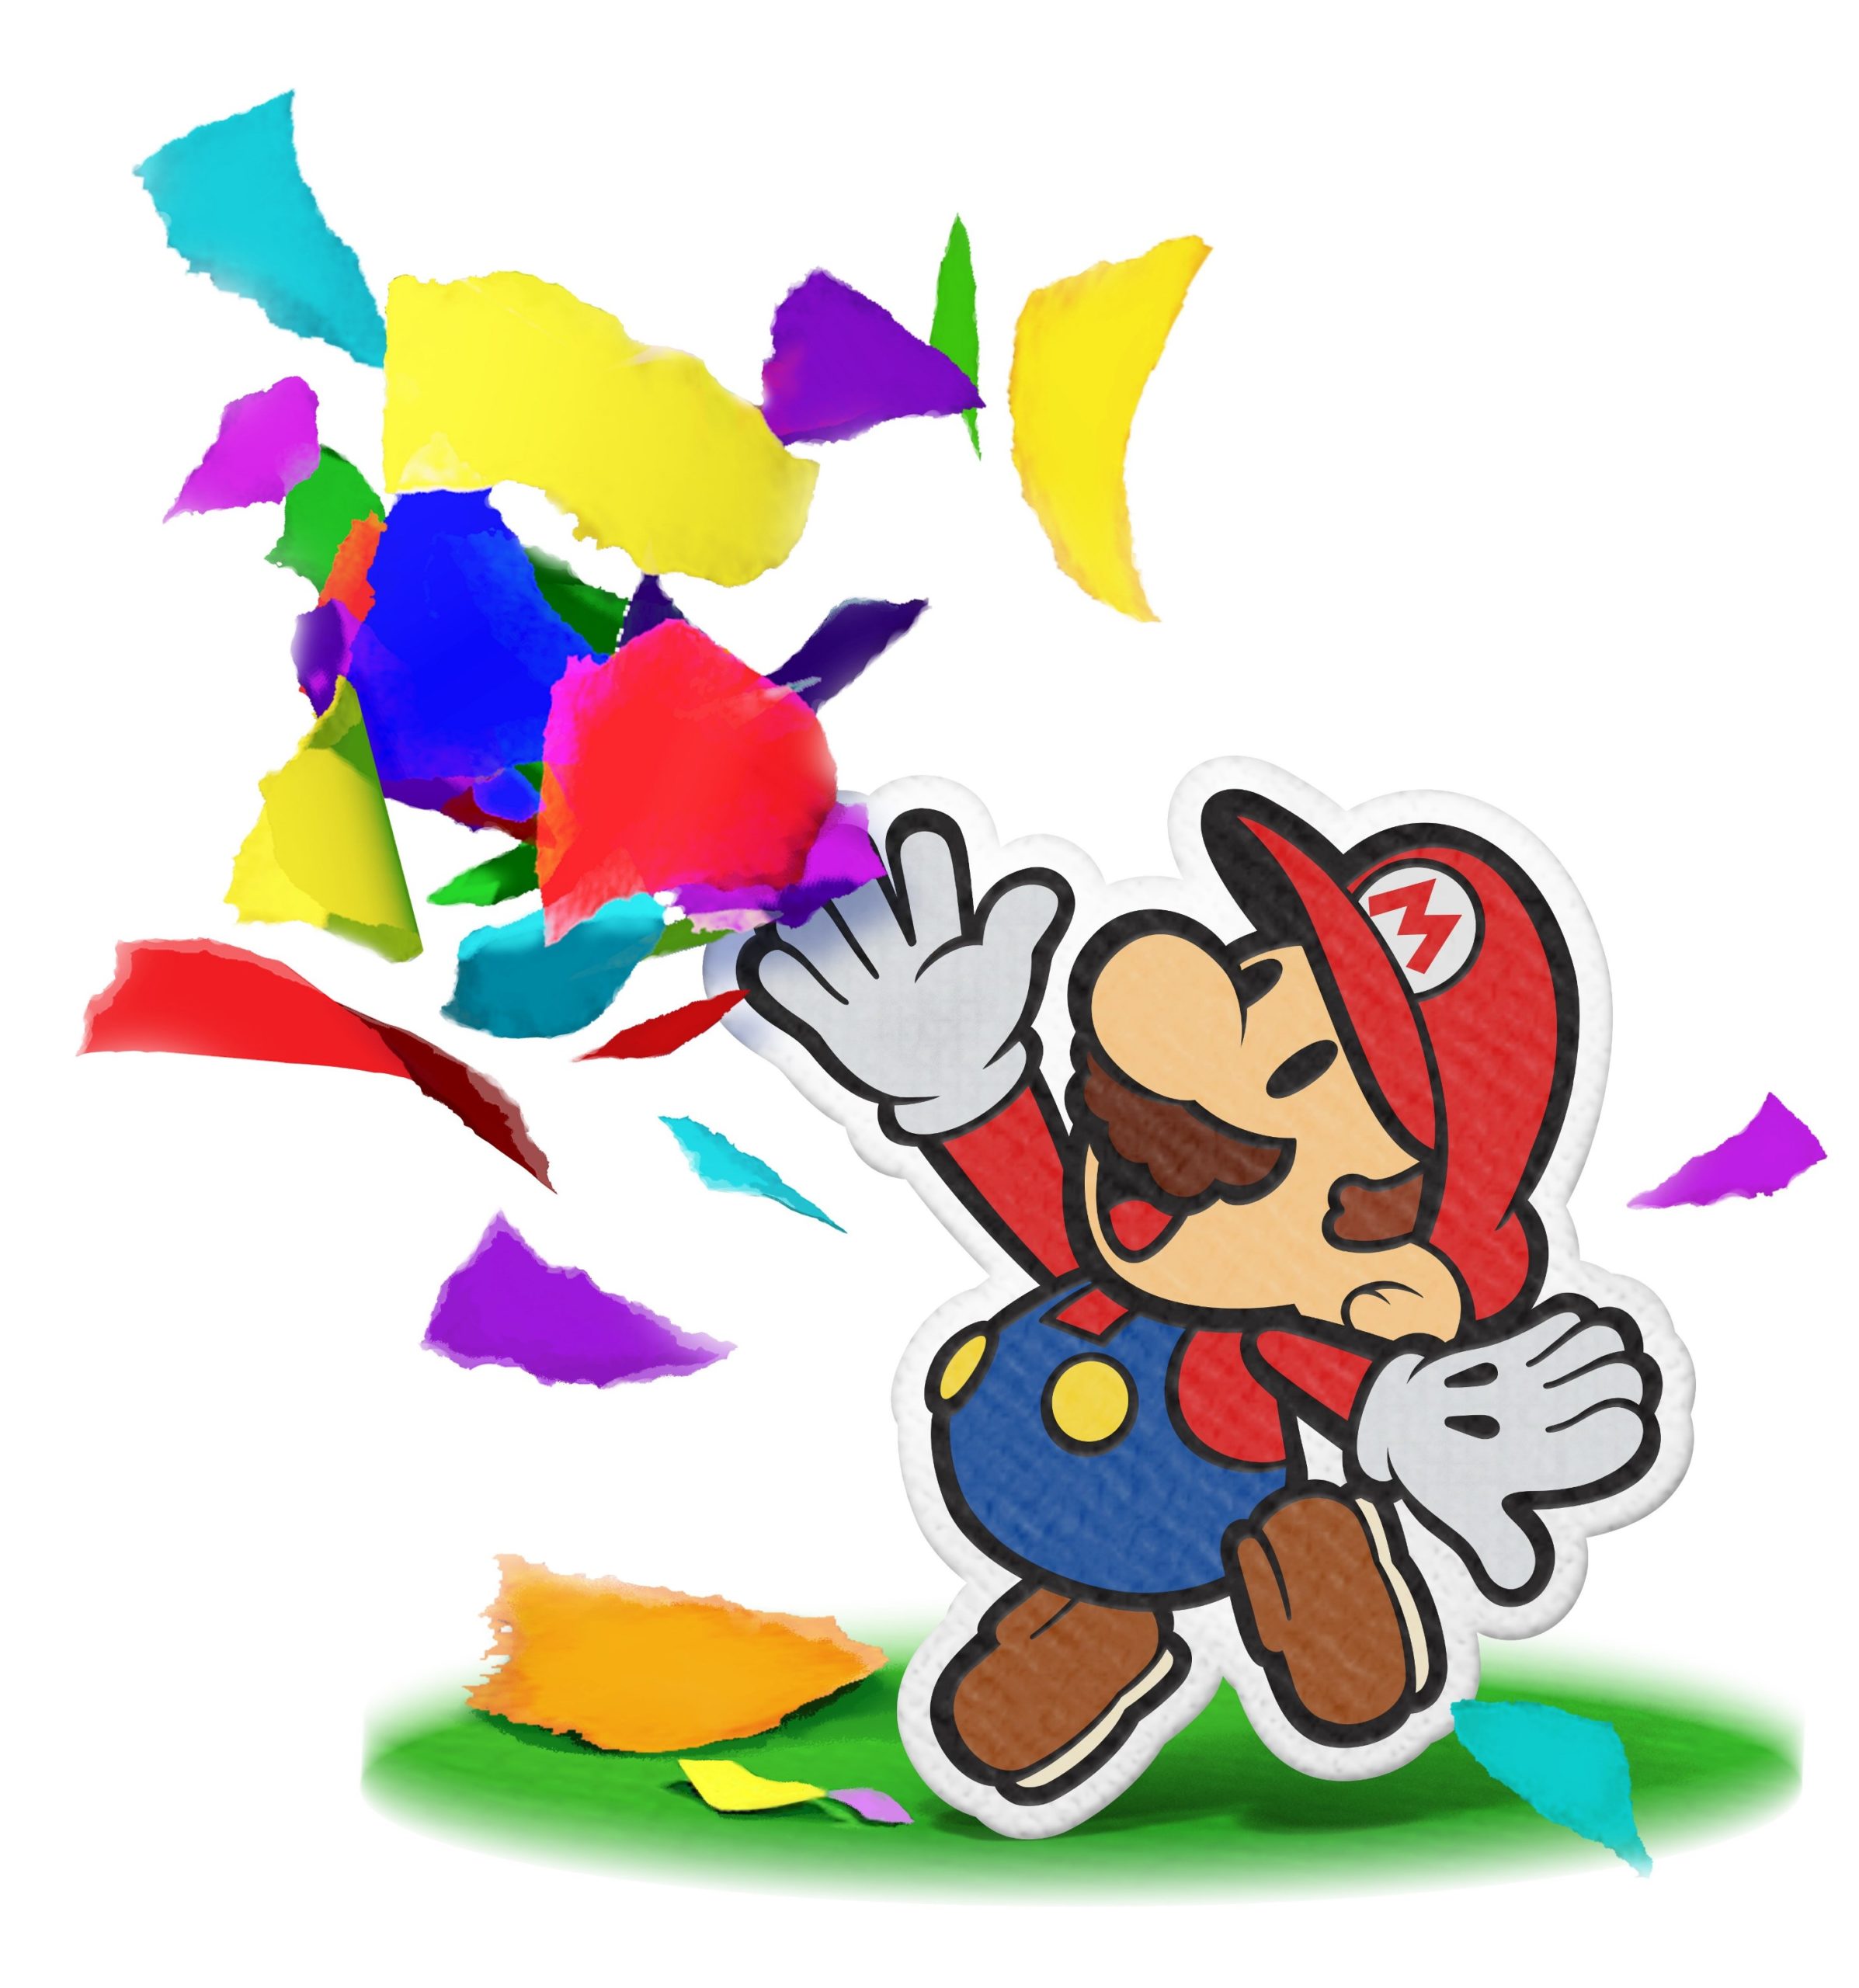 paper mario origami king release date